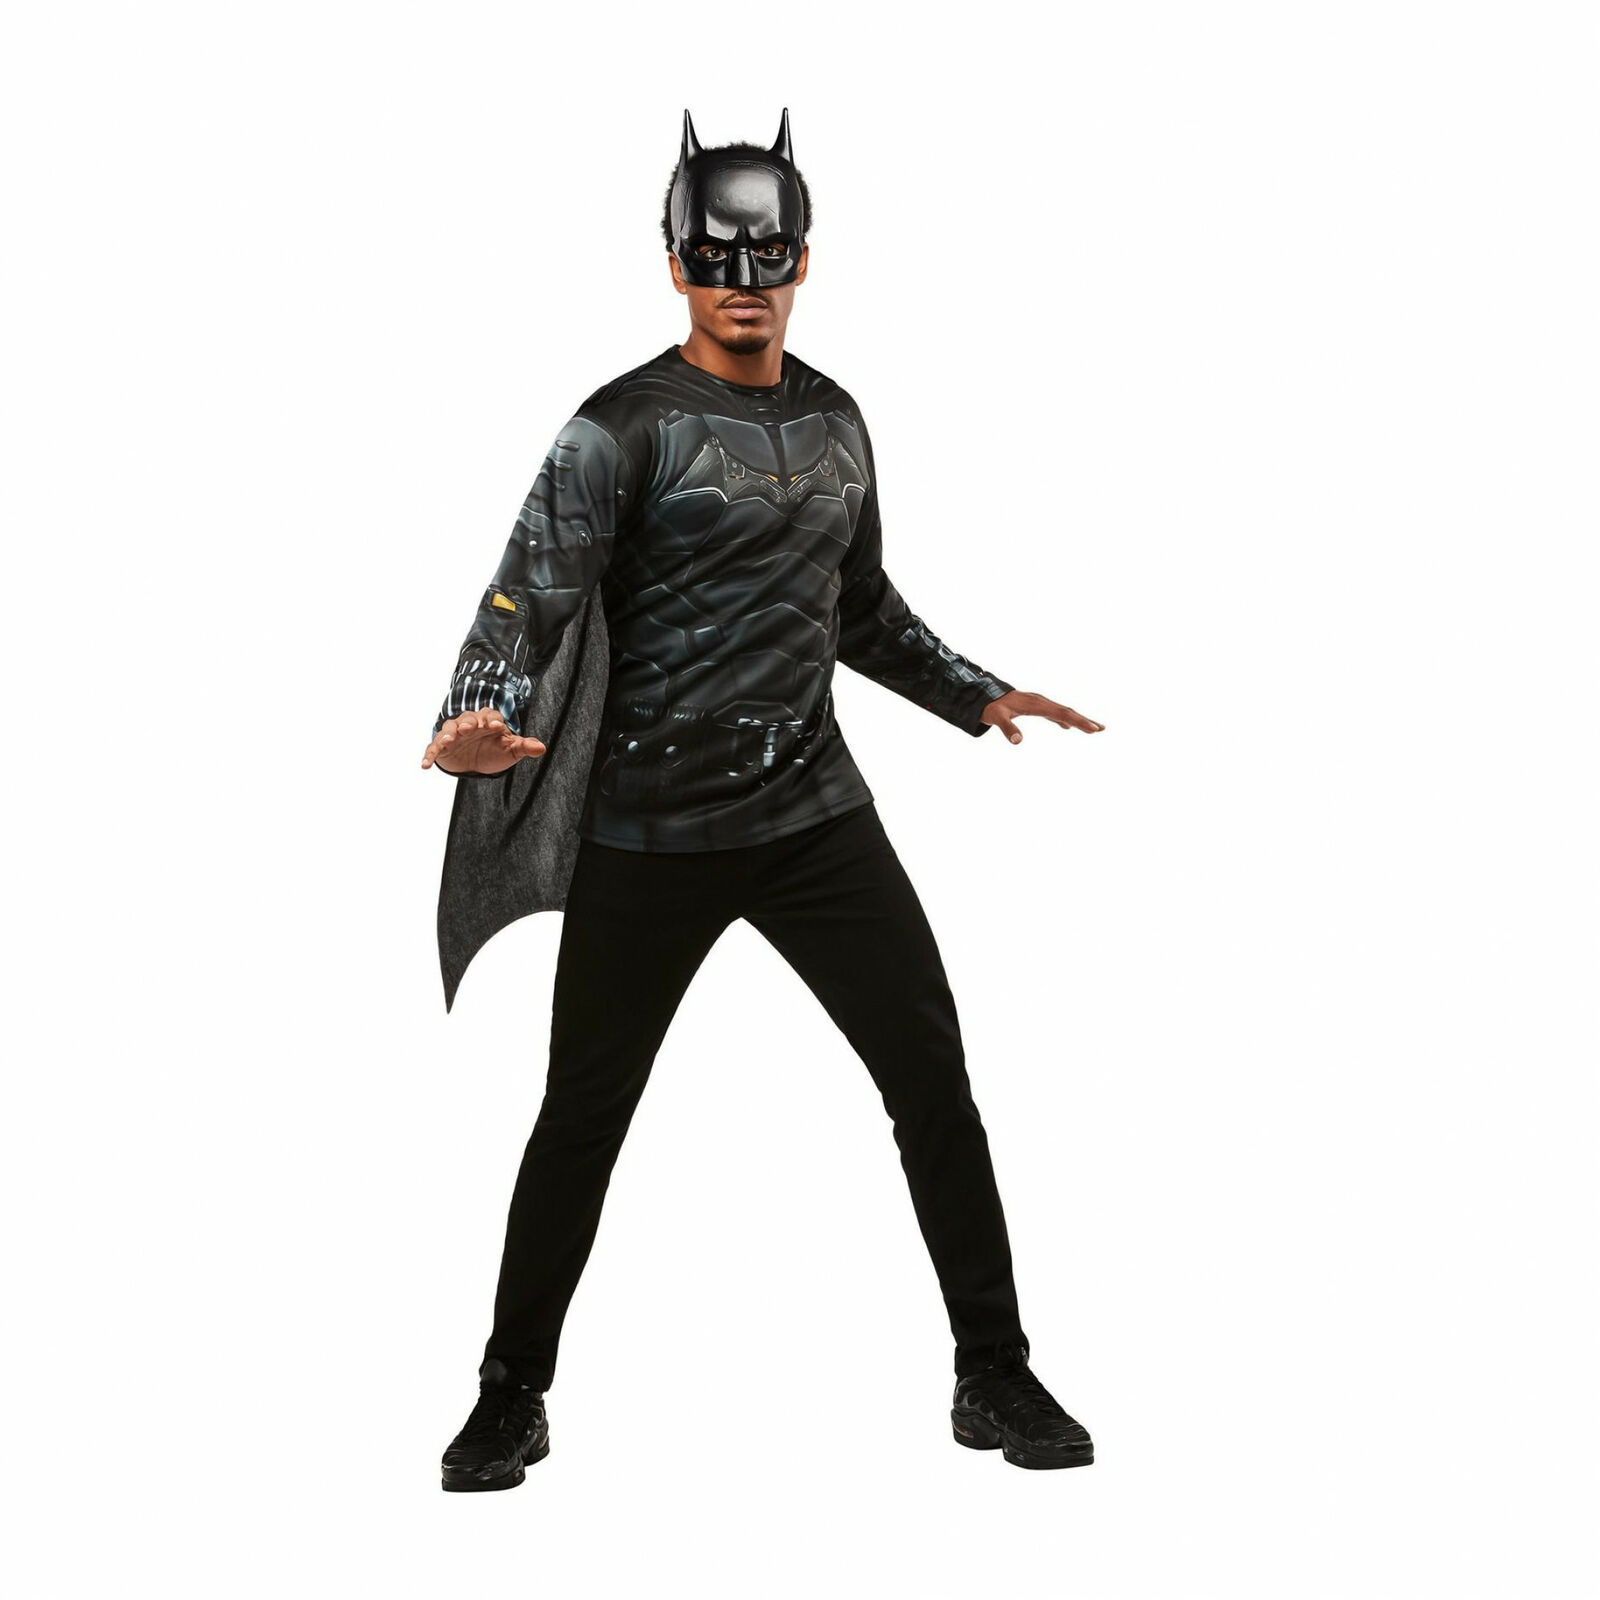 Primary image for The Batman Movie Complete Adult Costume with Cape Black